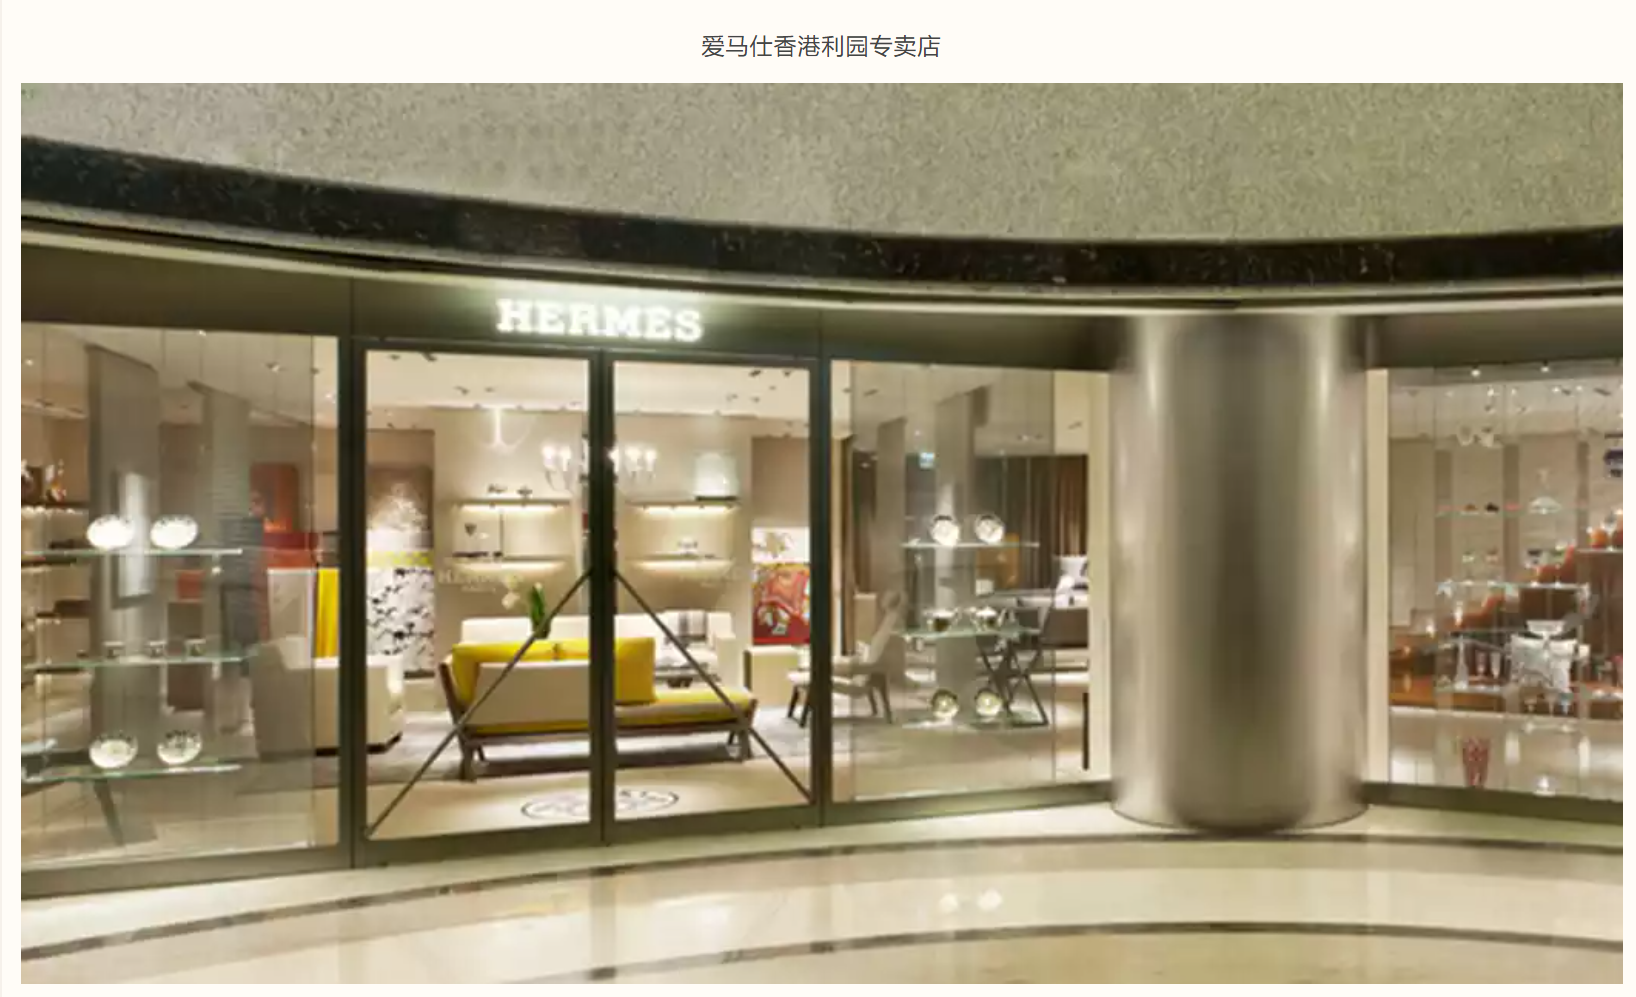 Hong Kong Returns to World’s No.1 in Luxury Spending, Hermès’ Lee Gardens Shop to Expand